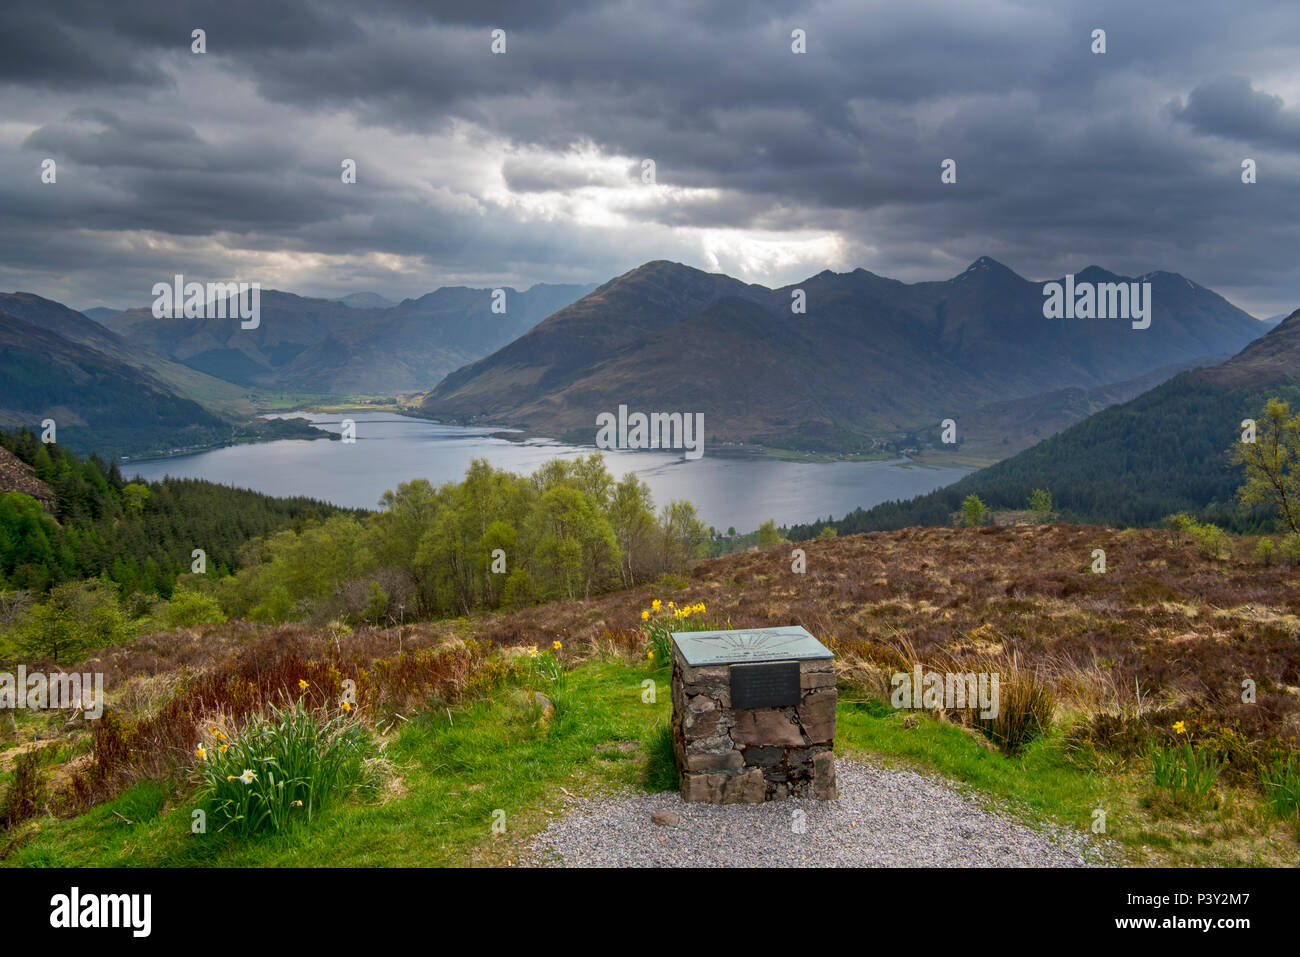 Orientation table at the Bealach Ratagain / Ratagan viewpoint with names of the mountain summits of the Five Sisters of Kintail, Highland, Scotland Stock Photo